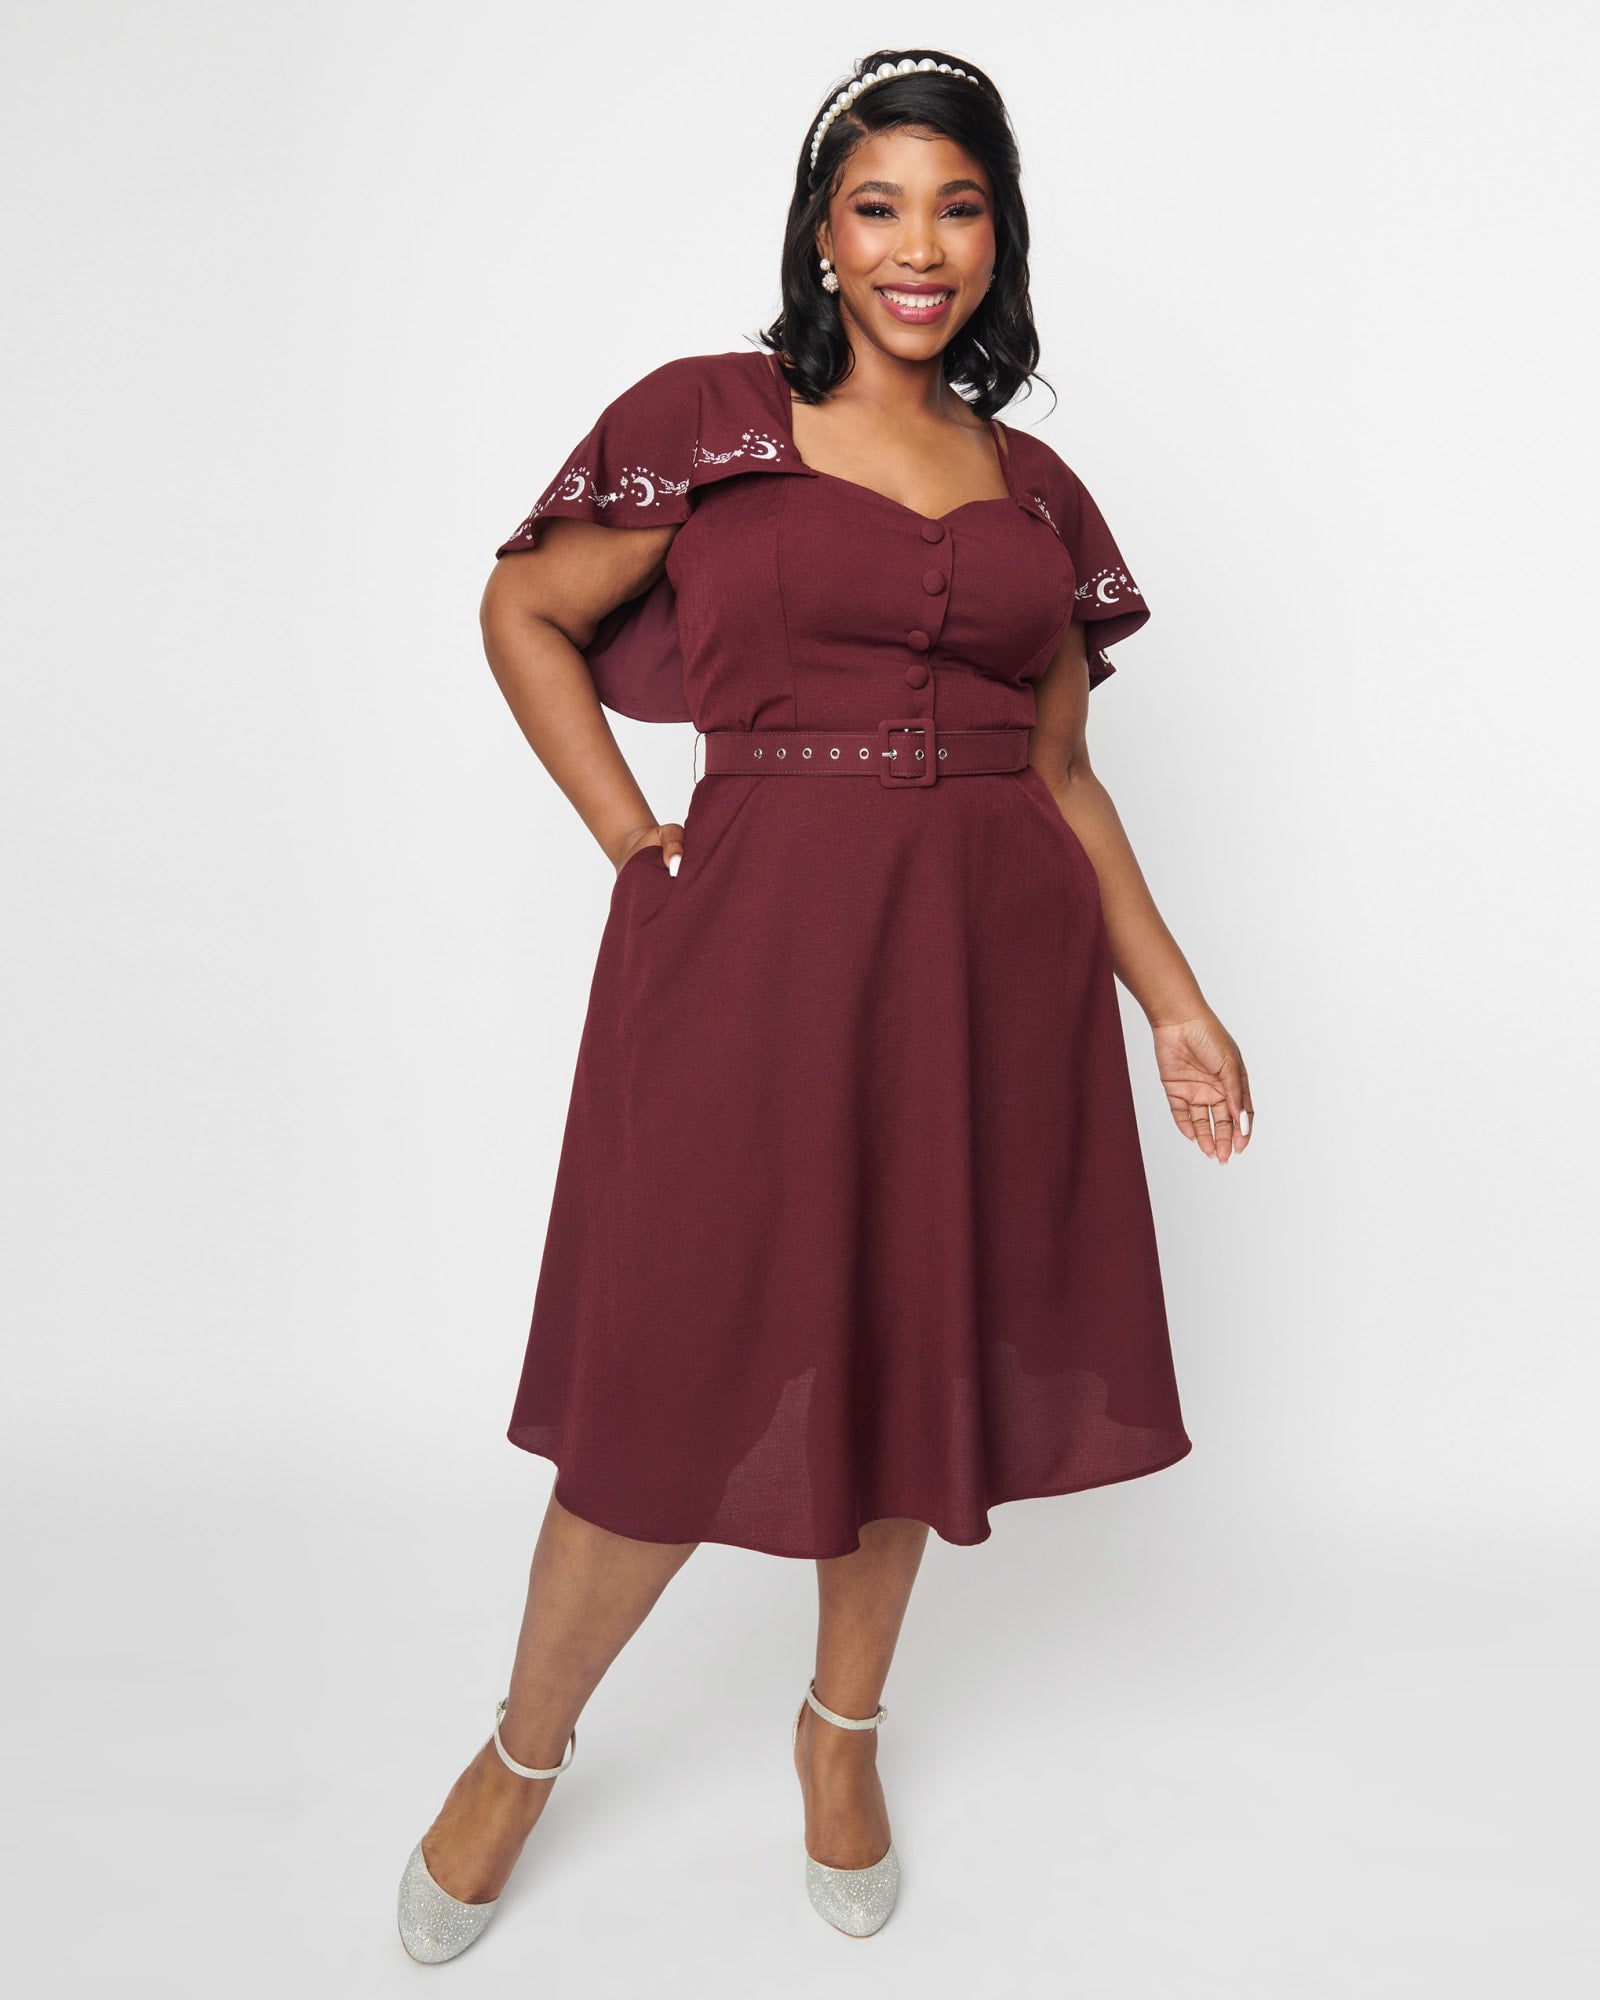 Burgundy Floral Swing Dress  Plus size legging outfits, Plus size